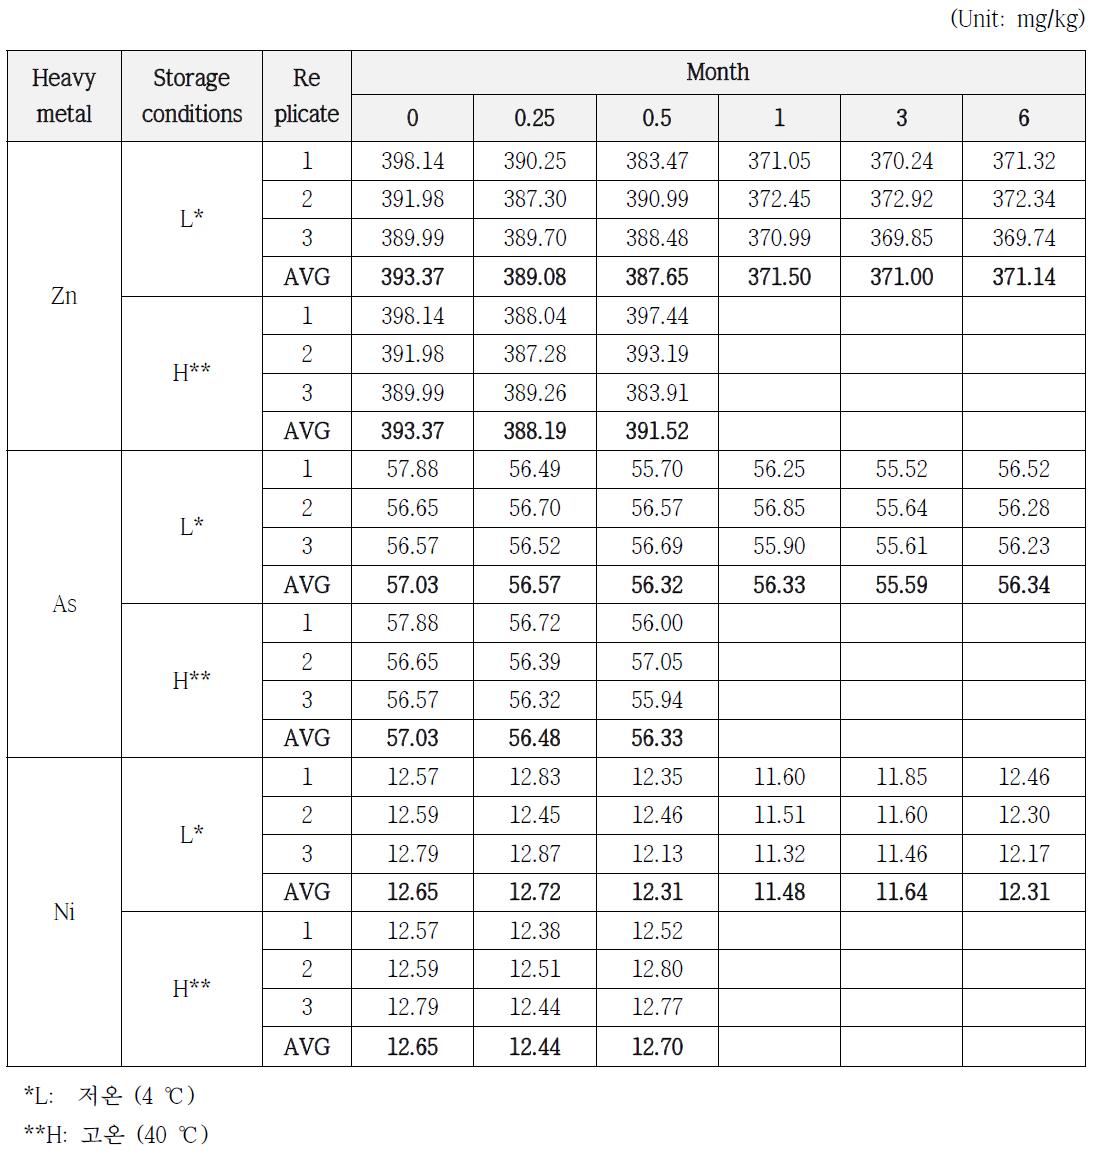 Result of stability study for Zinc, Arsenic and Nickel in soil PTMs of Metal-Ⅰ